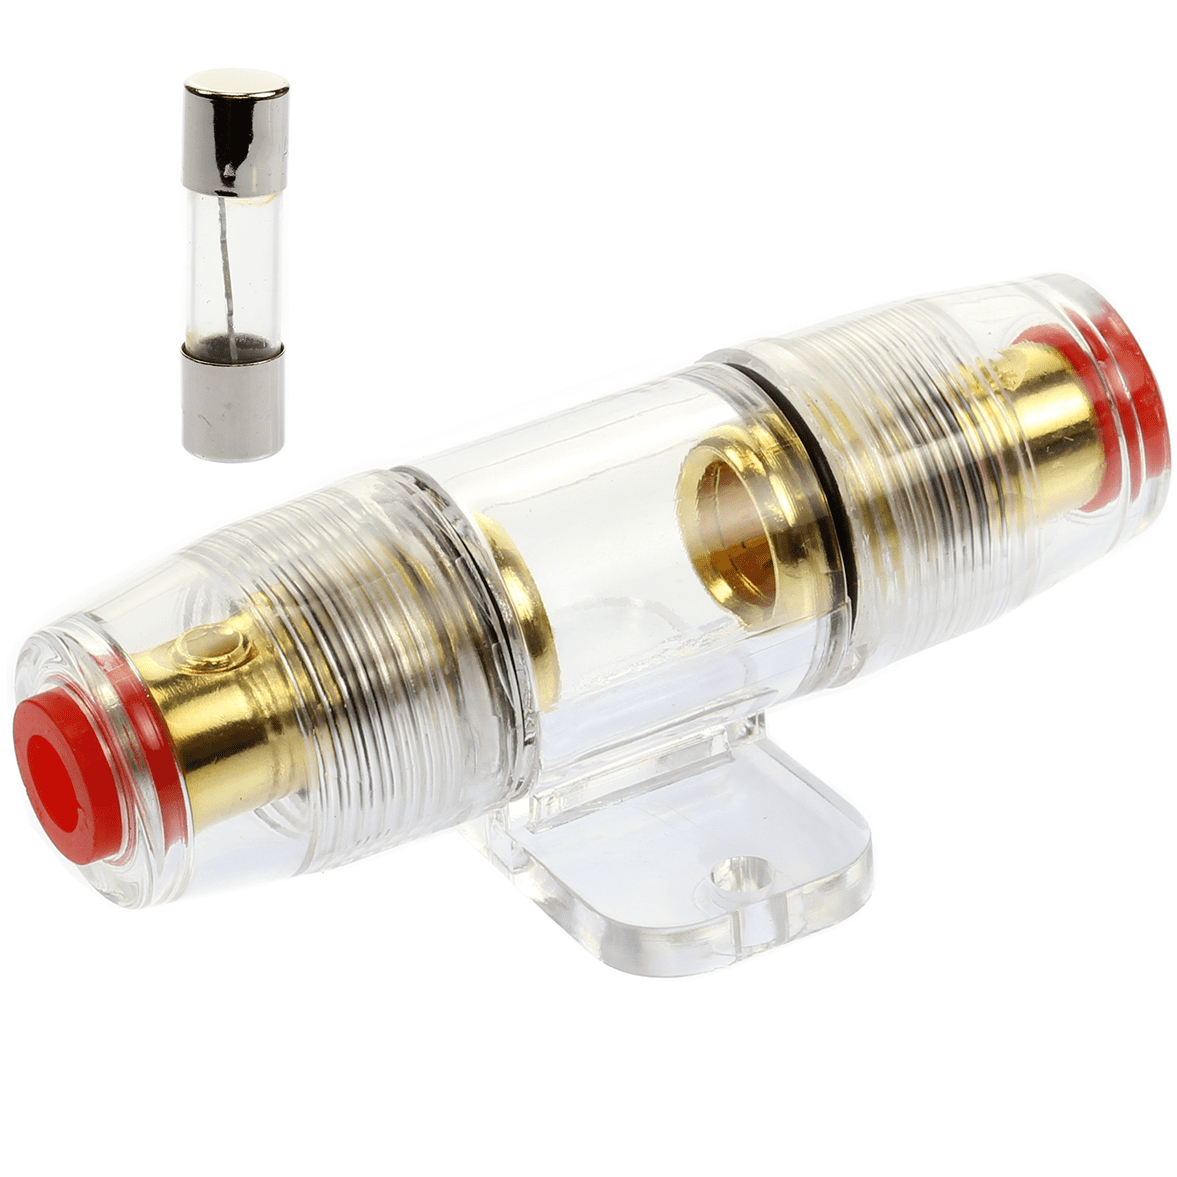 Holder Gold Fuseholder 4 AWG Gauge Inline in and Out VOODOO ANL Fuse 80 AMP 1 